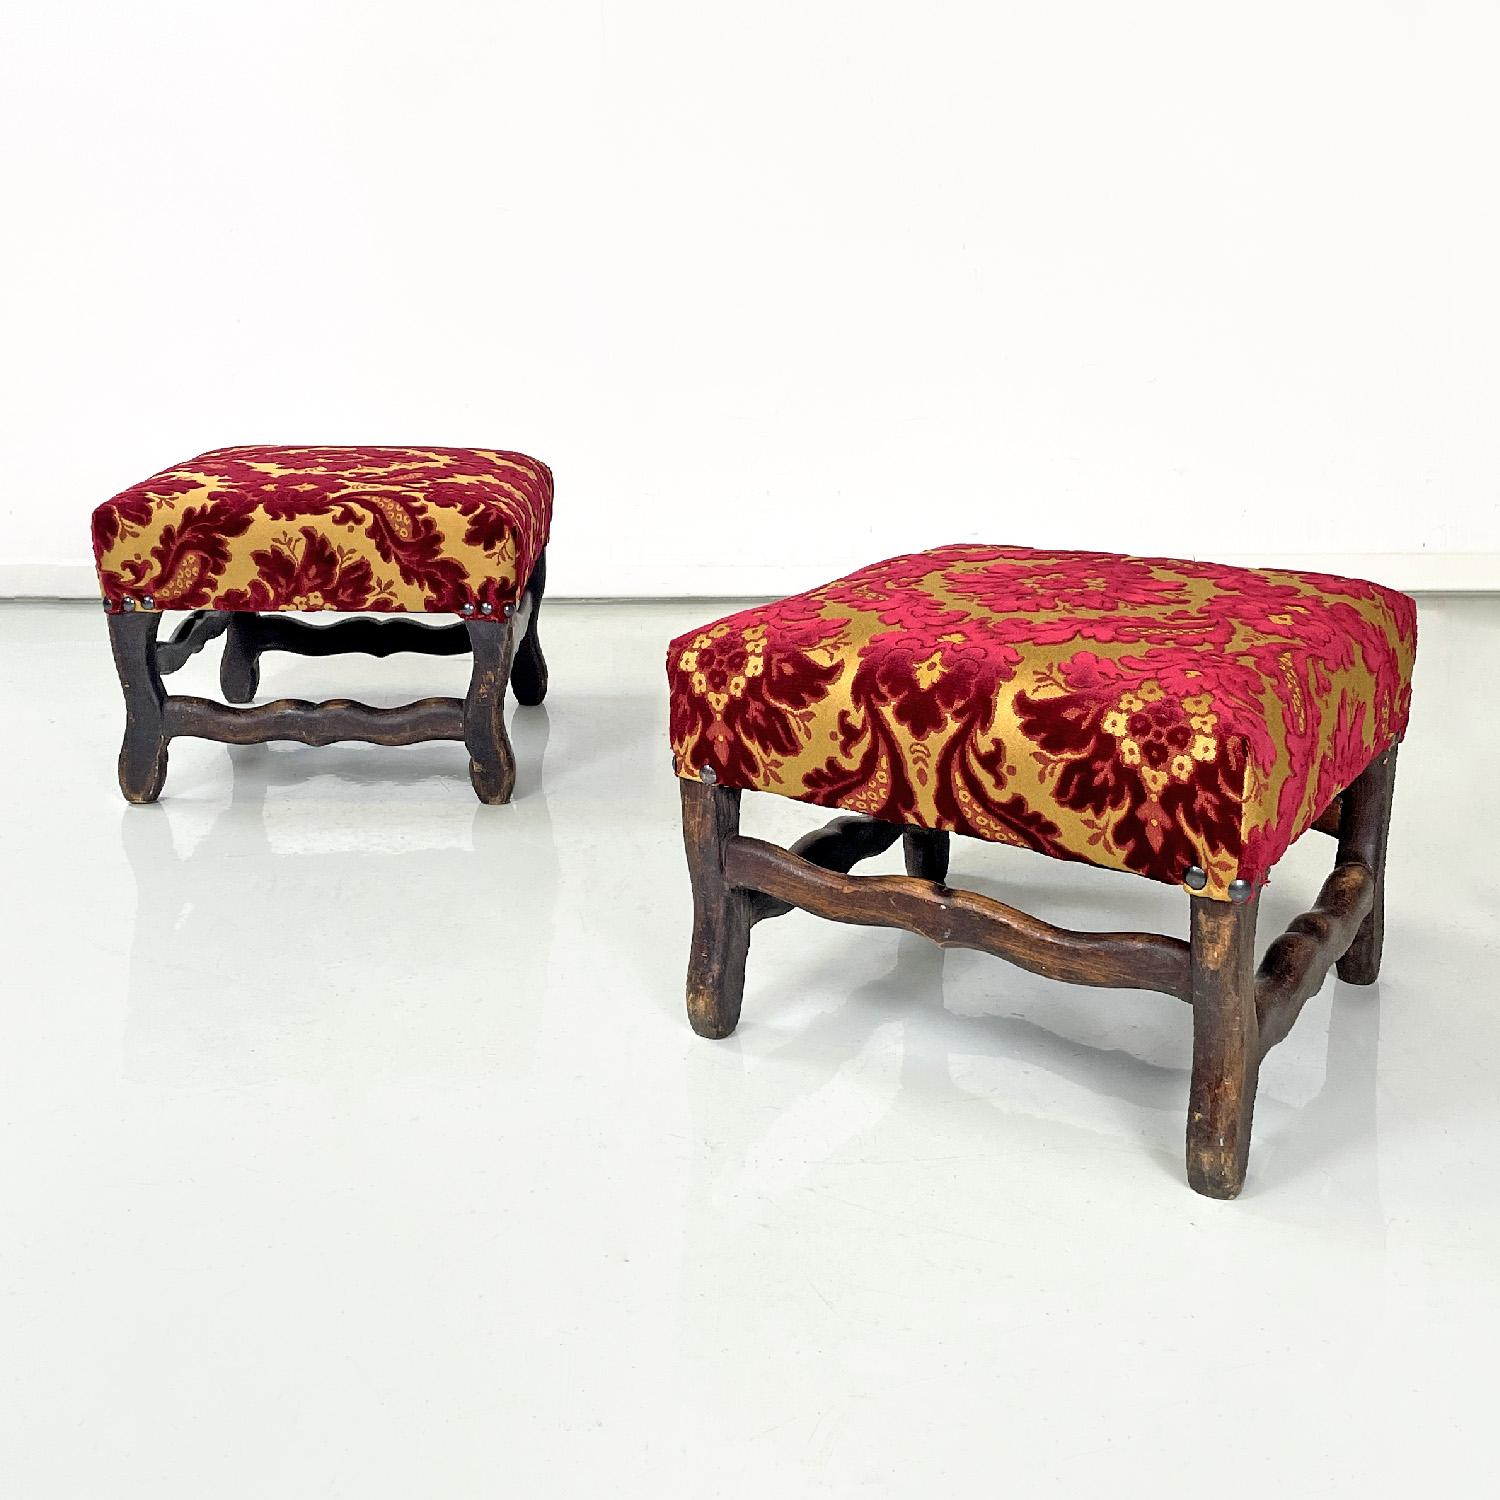 French antique poufs in wood with yellow and dark red damask fabric, 1850s
Pair of square poufs. They have a padded seat covered with a mustard yellow and bright red damask fabric, the red decoration is in velvet and is slightly in relief. The